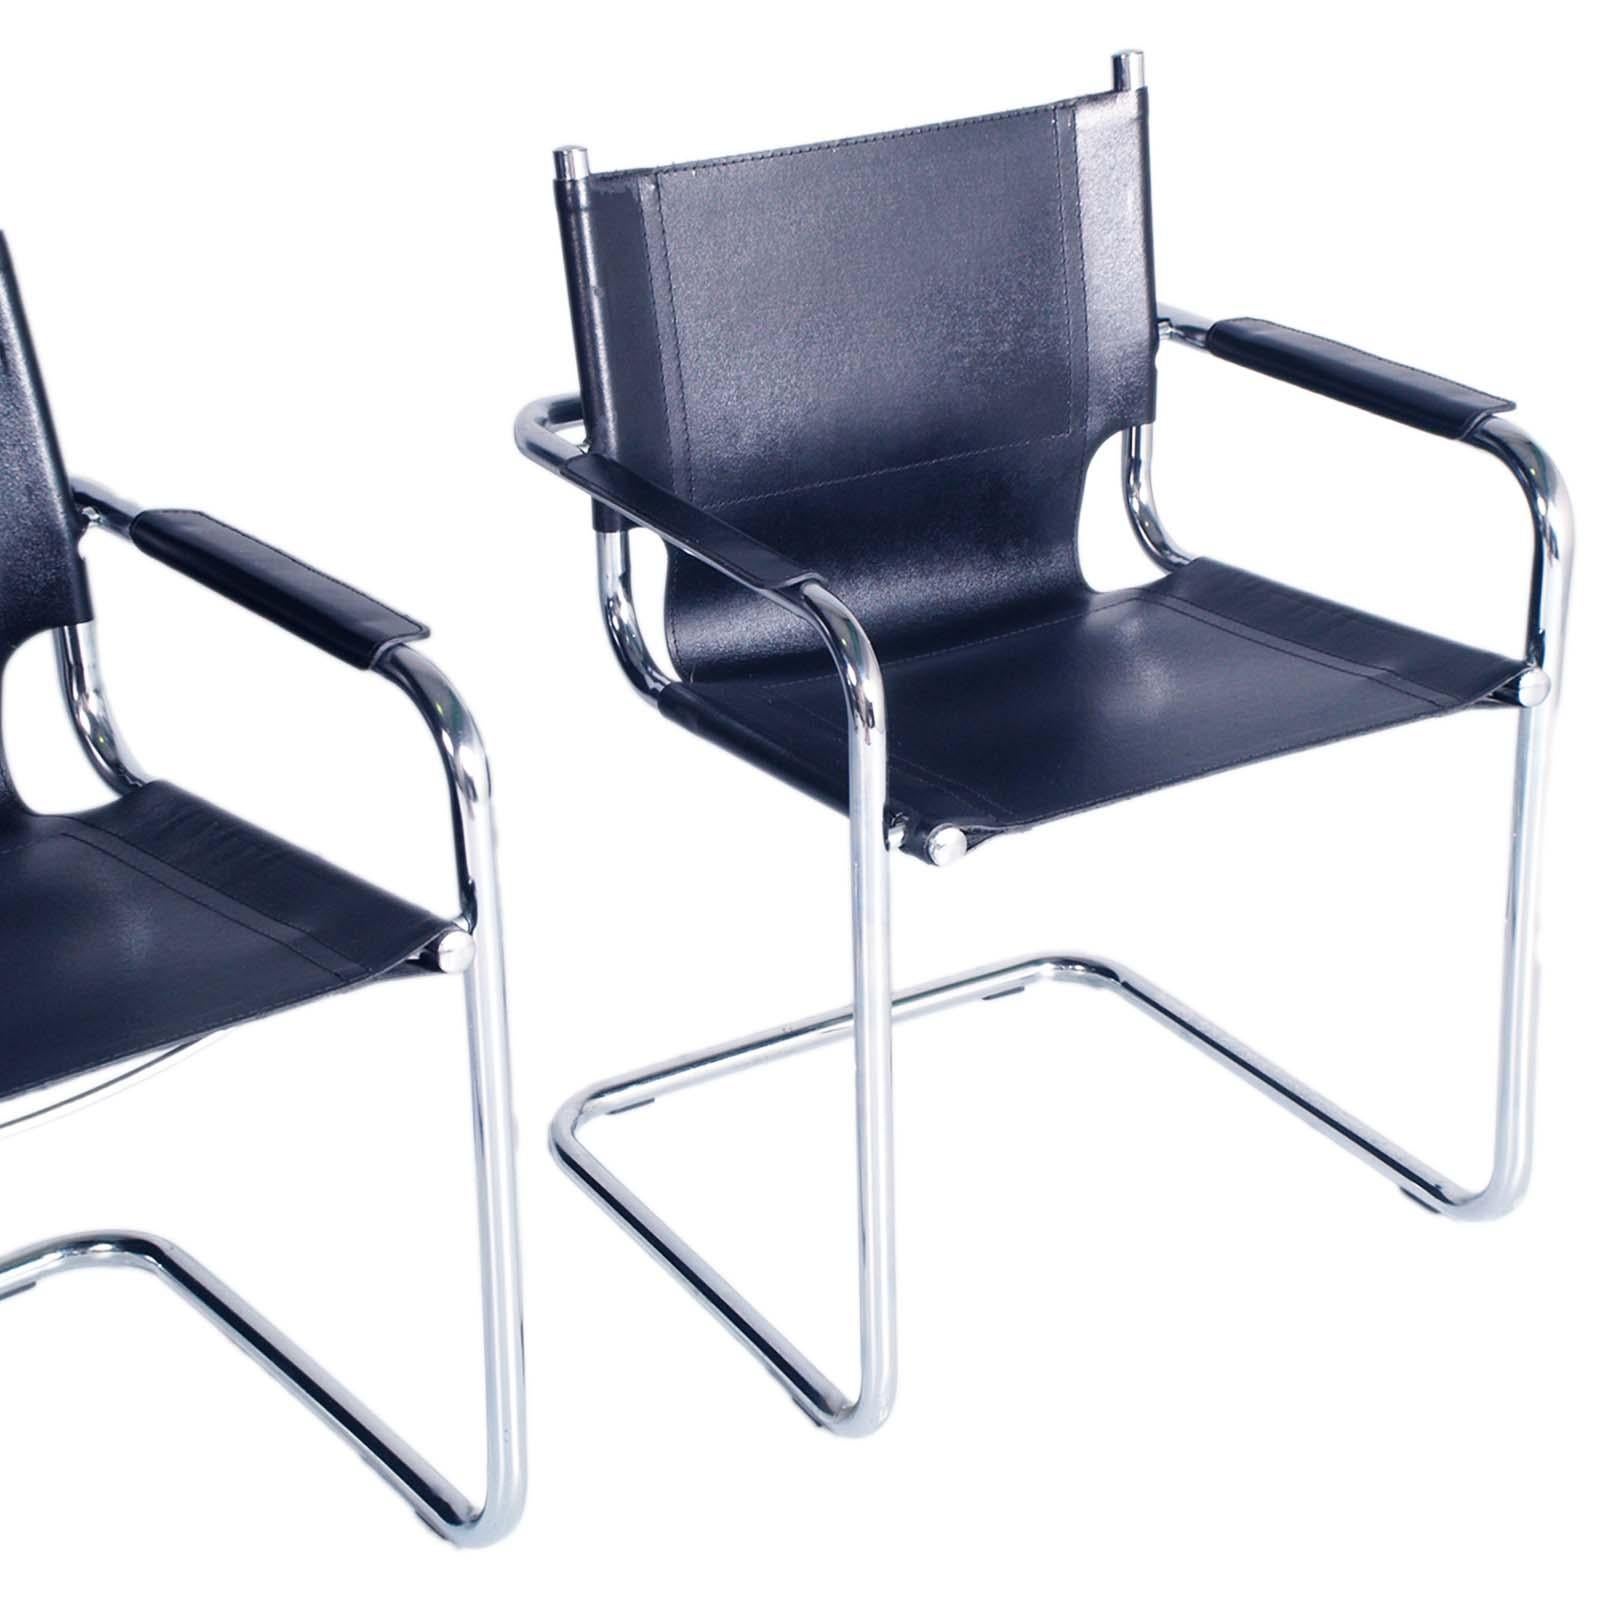 Equipped with a sled frame in chromed tubular steel with welded terminals and two comfortable armrests, it is characterized by the upholstery of the seat, back and armrests in leather.